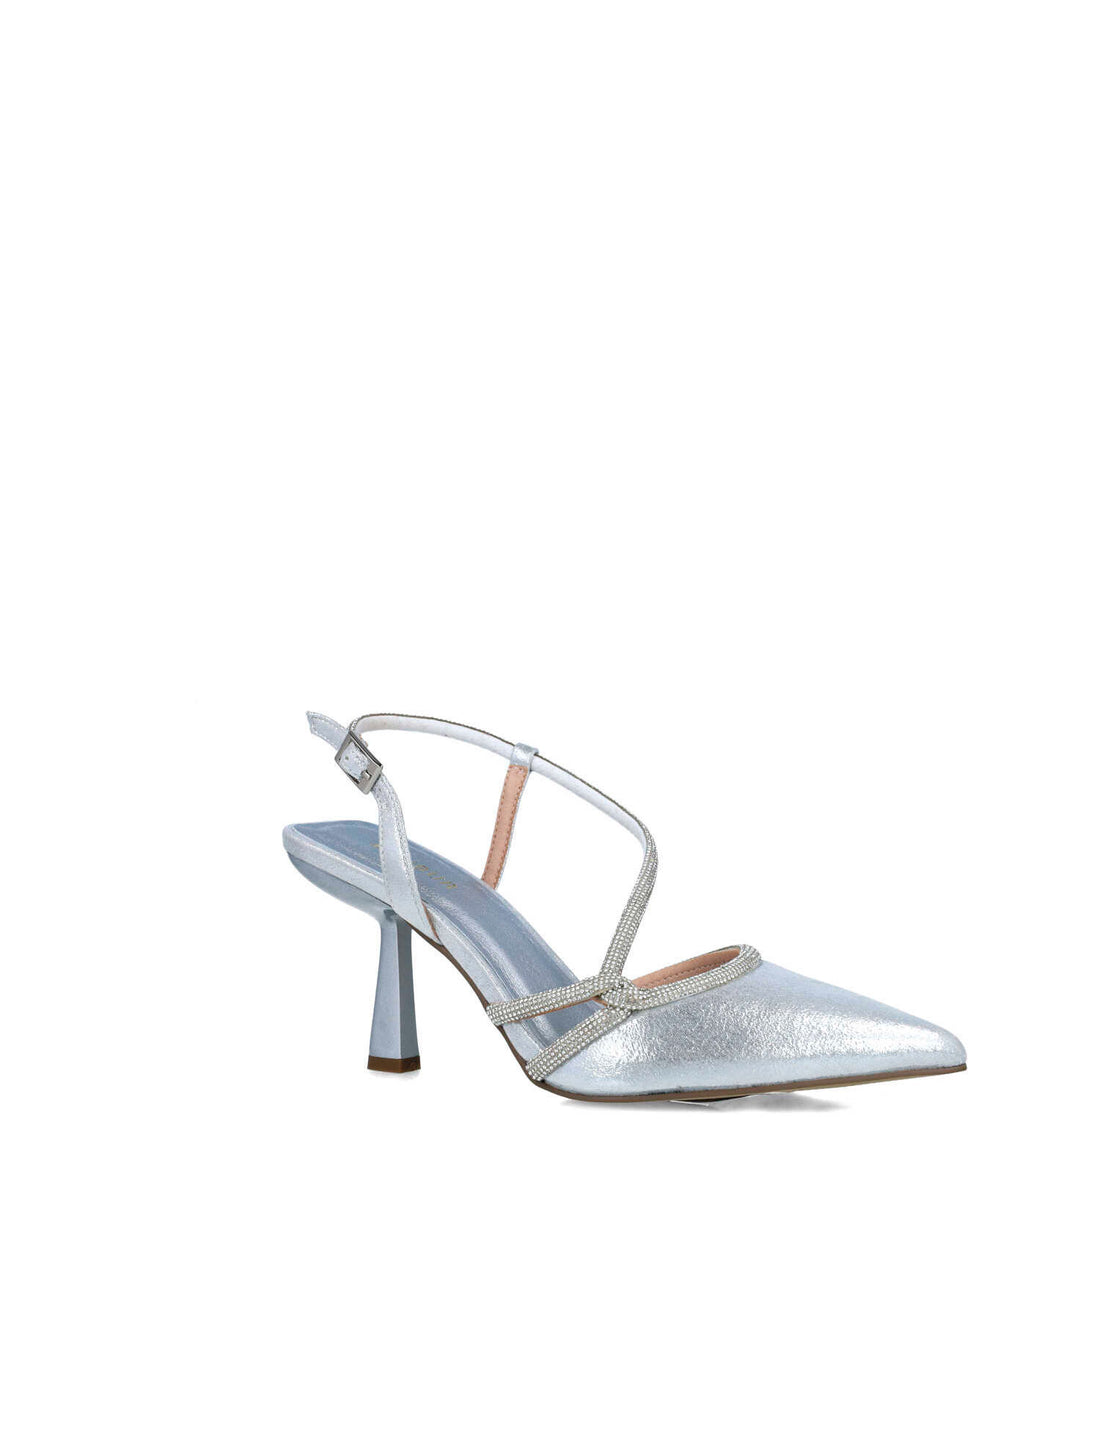 Silver Pumps With Embellished Strap_24774_09_02